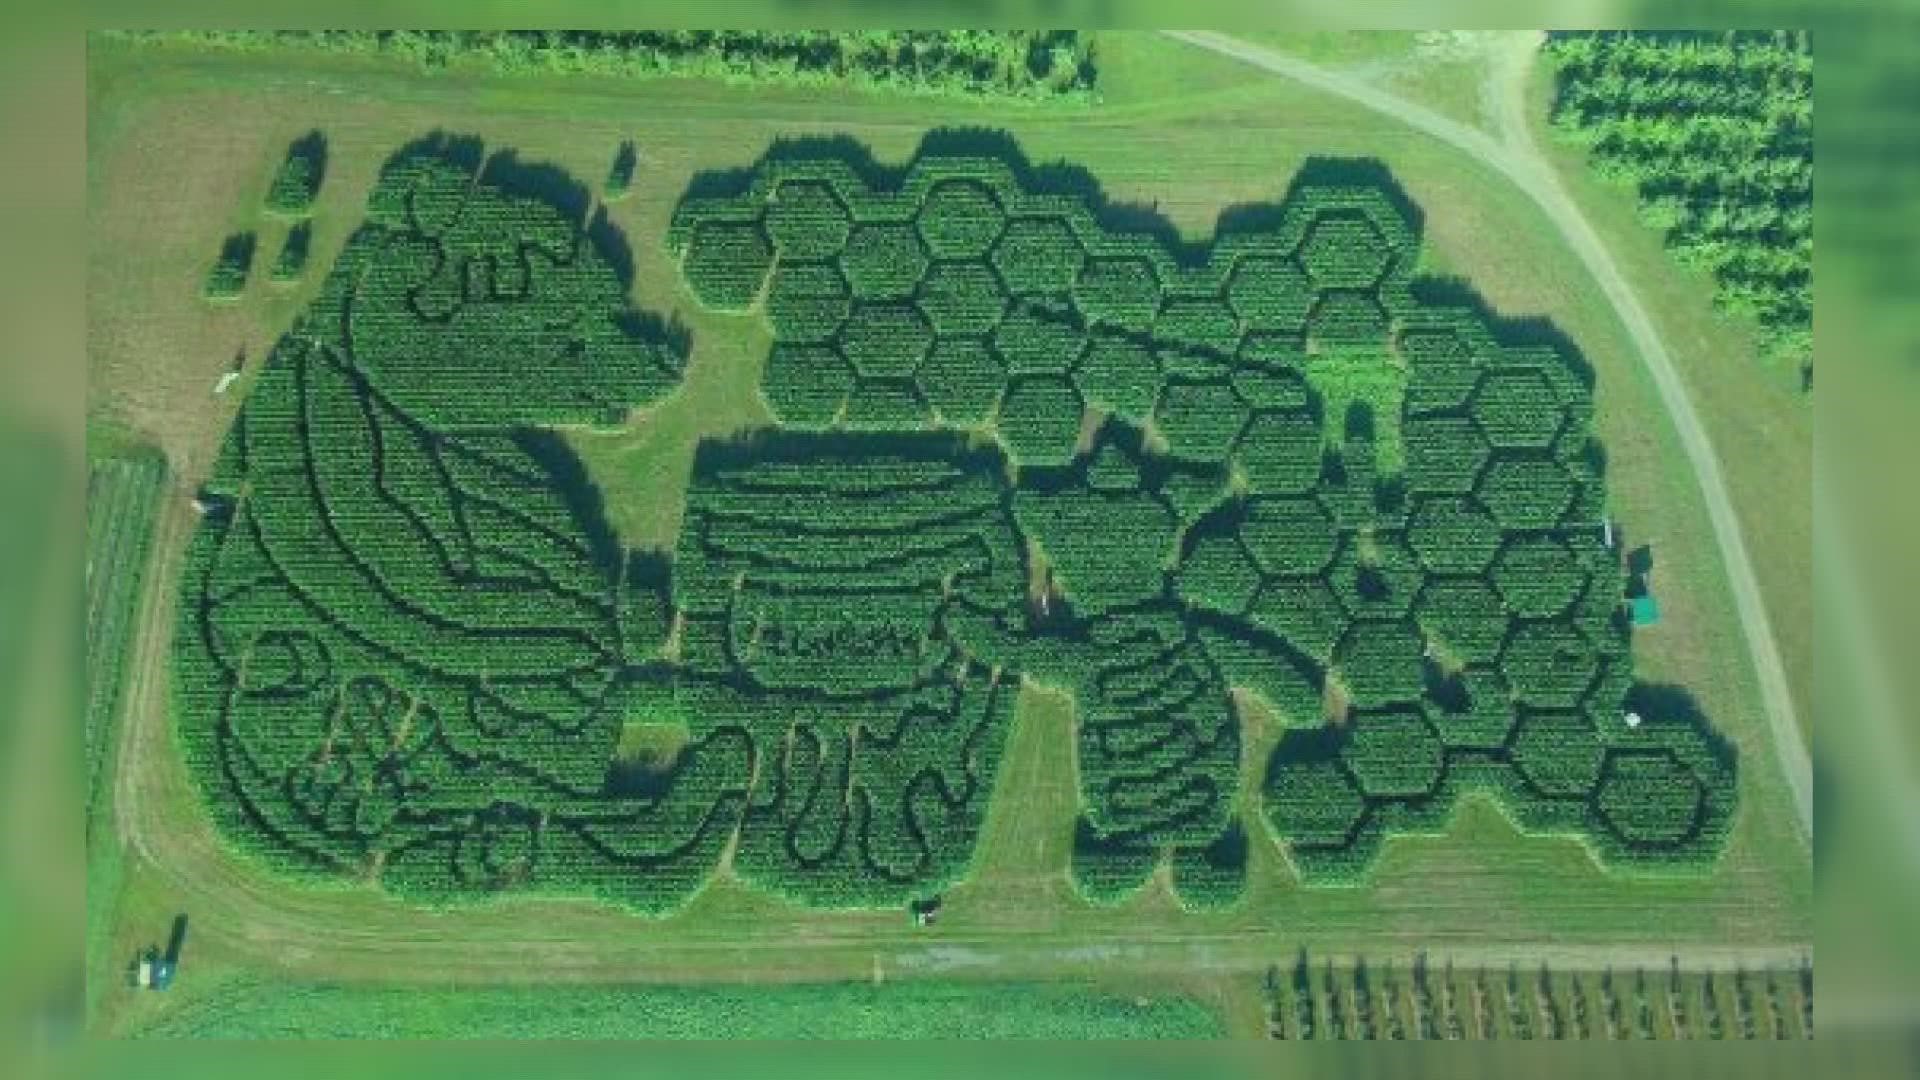 Treworgy Family Orchards in Levant has been nominated for the USA Today Best Corn Maze title for the last five years. This year, they won.